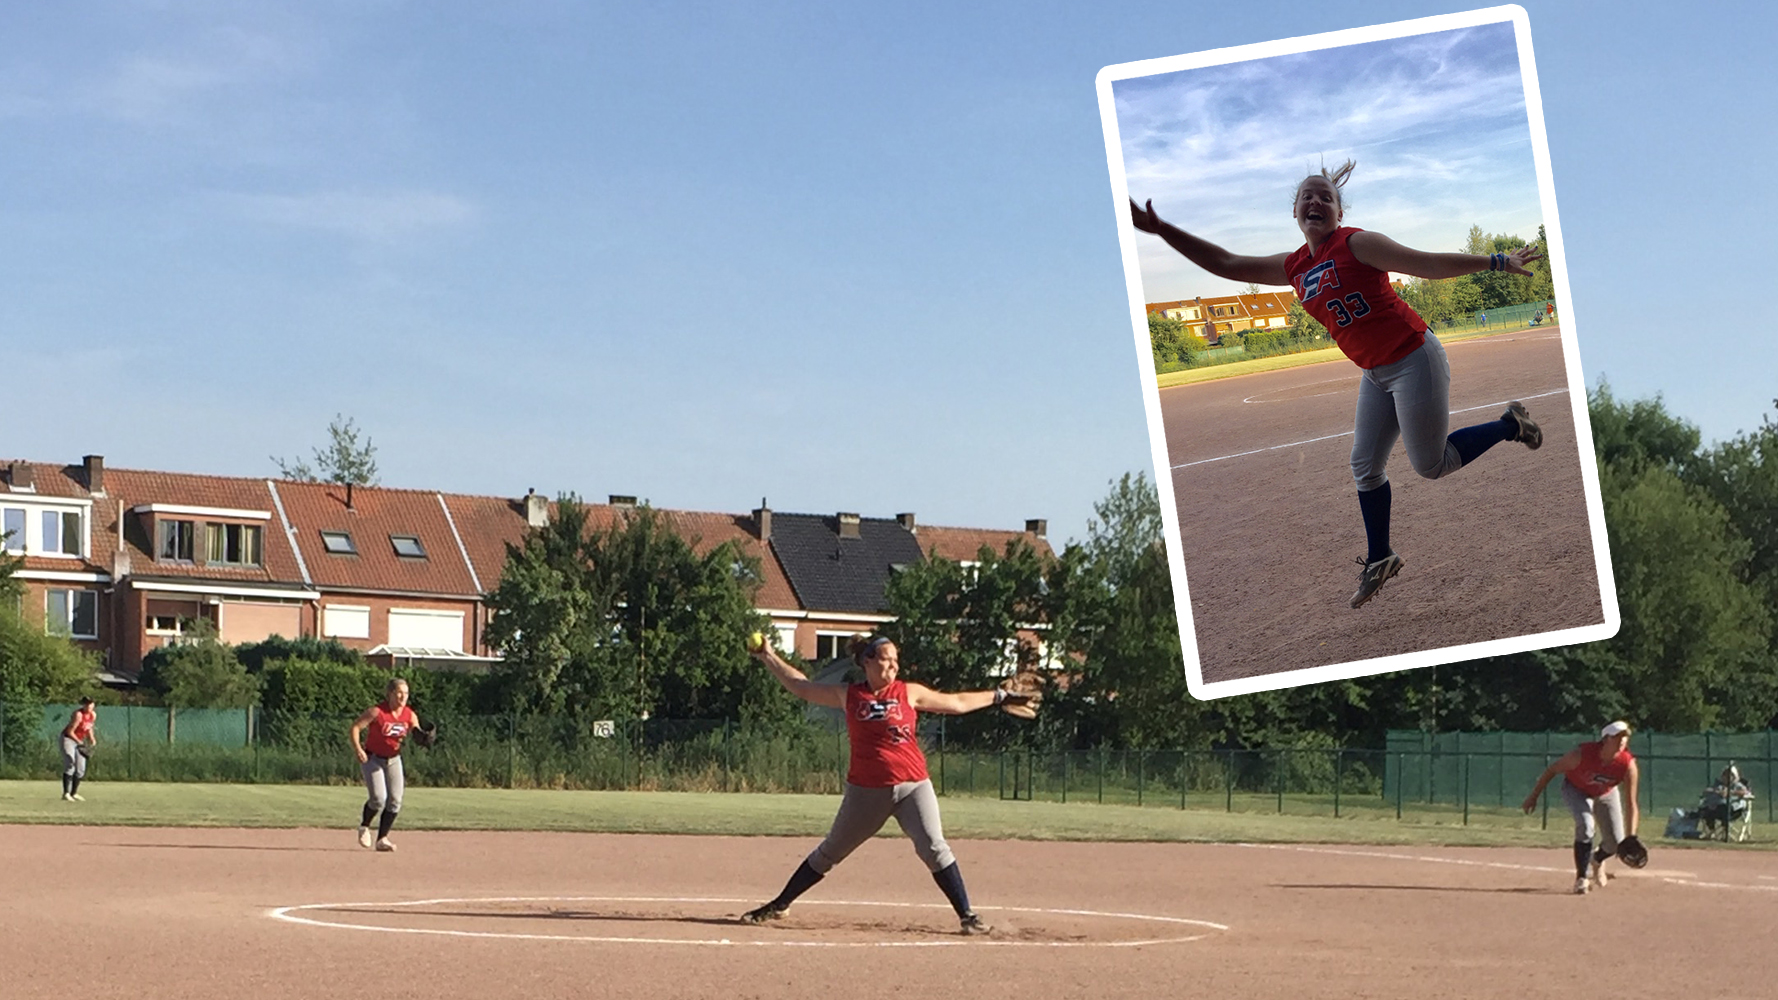 Kelsey Boarman enjoyed a 10-day, three-city European softball tour with American International Sports Teams (AIST) shortly after graduating from Salve Regina.